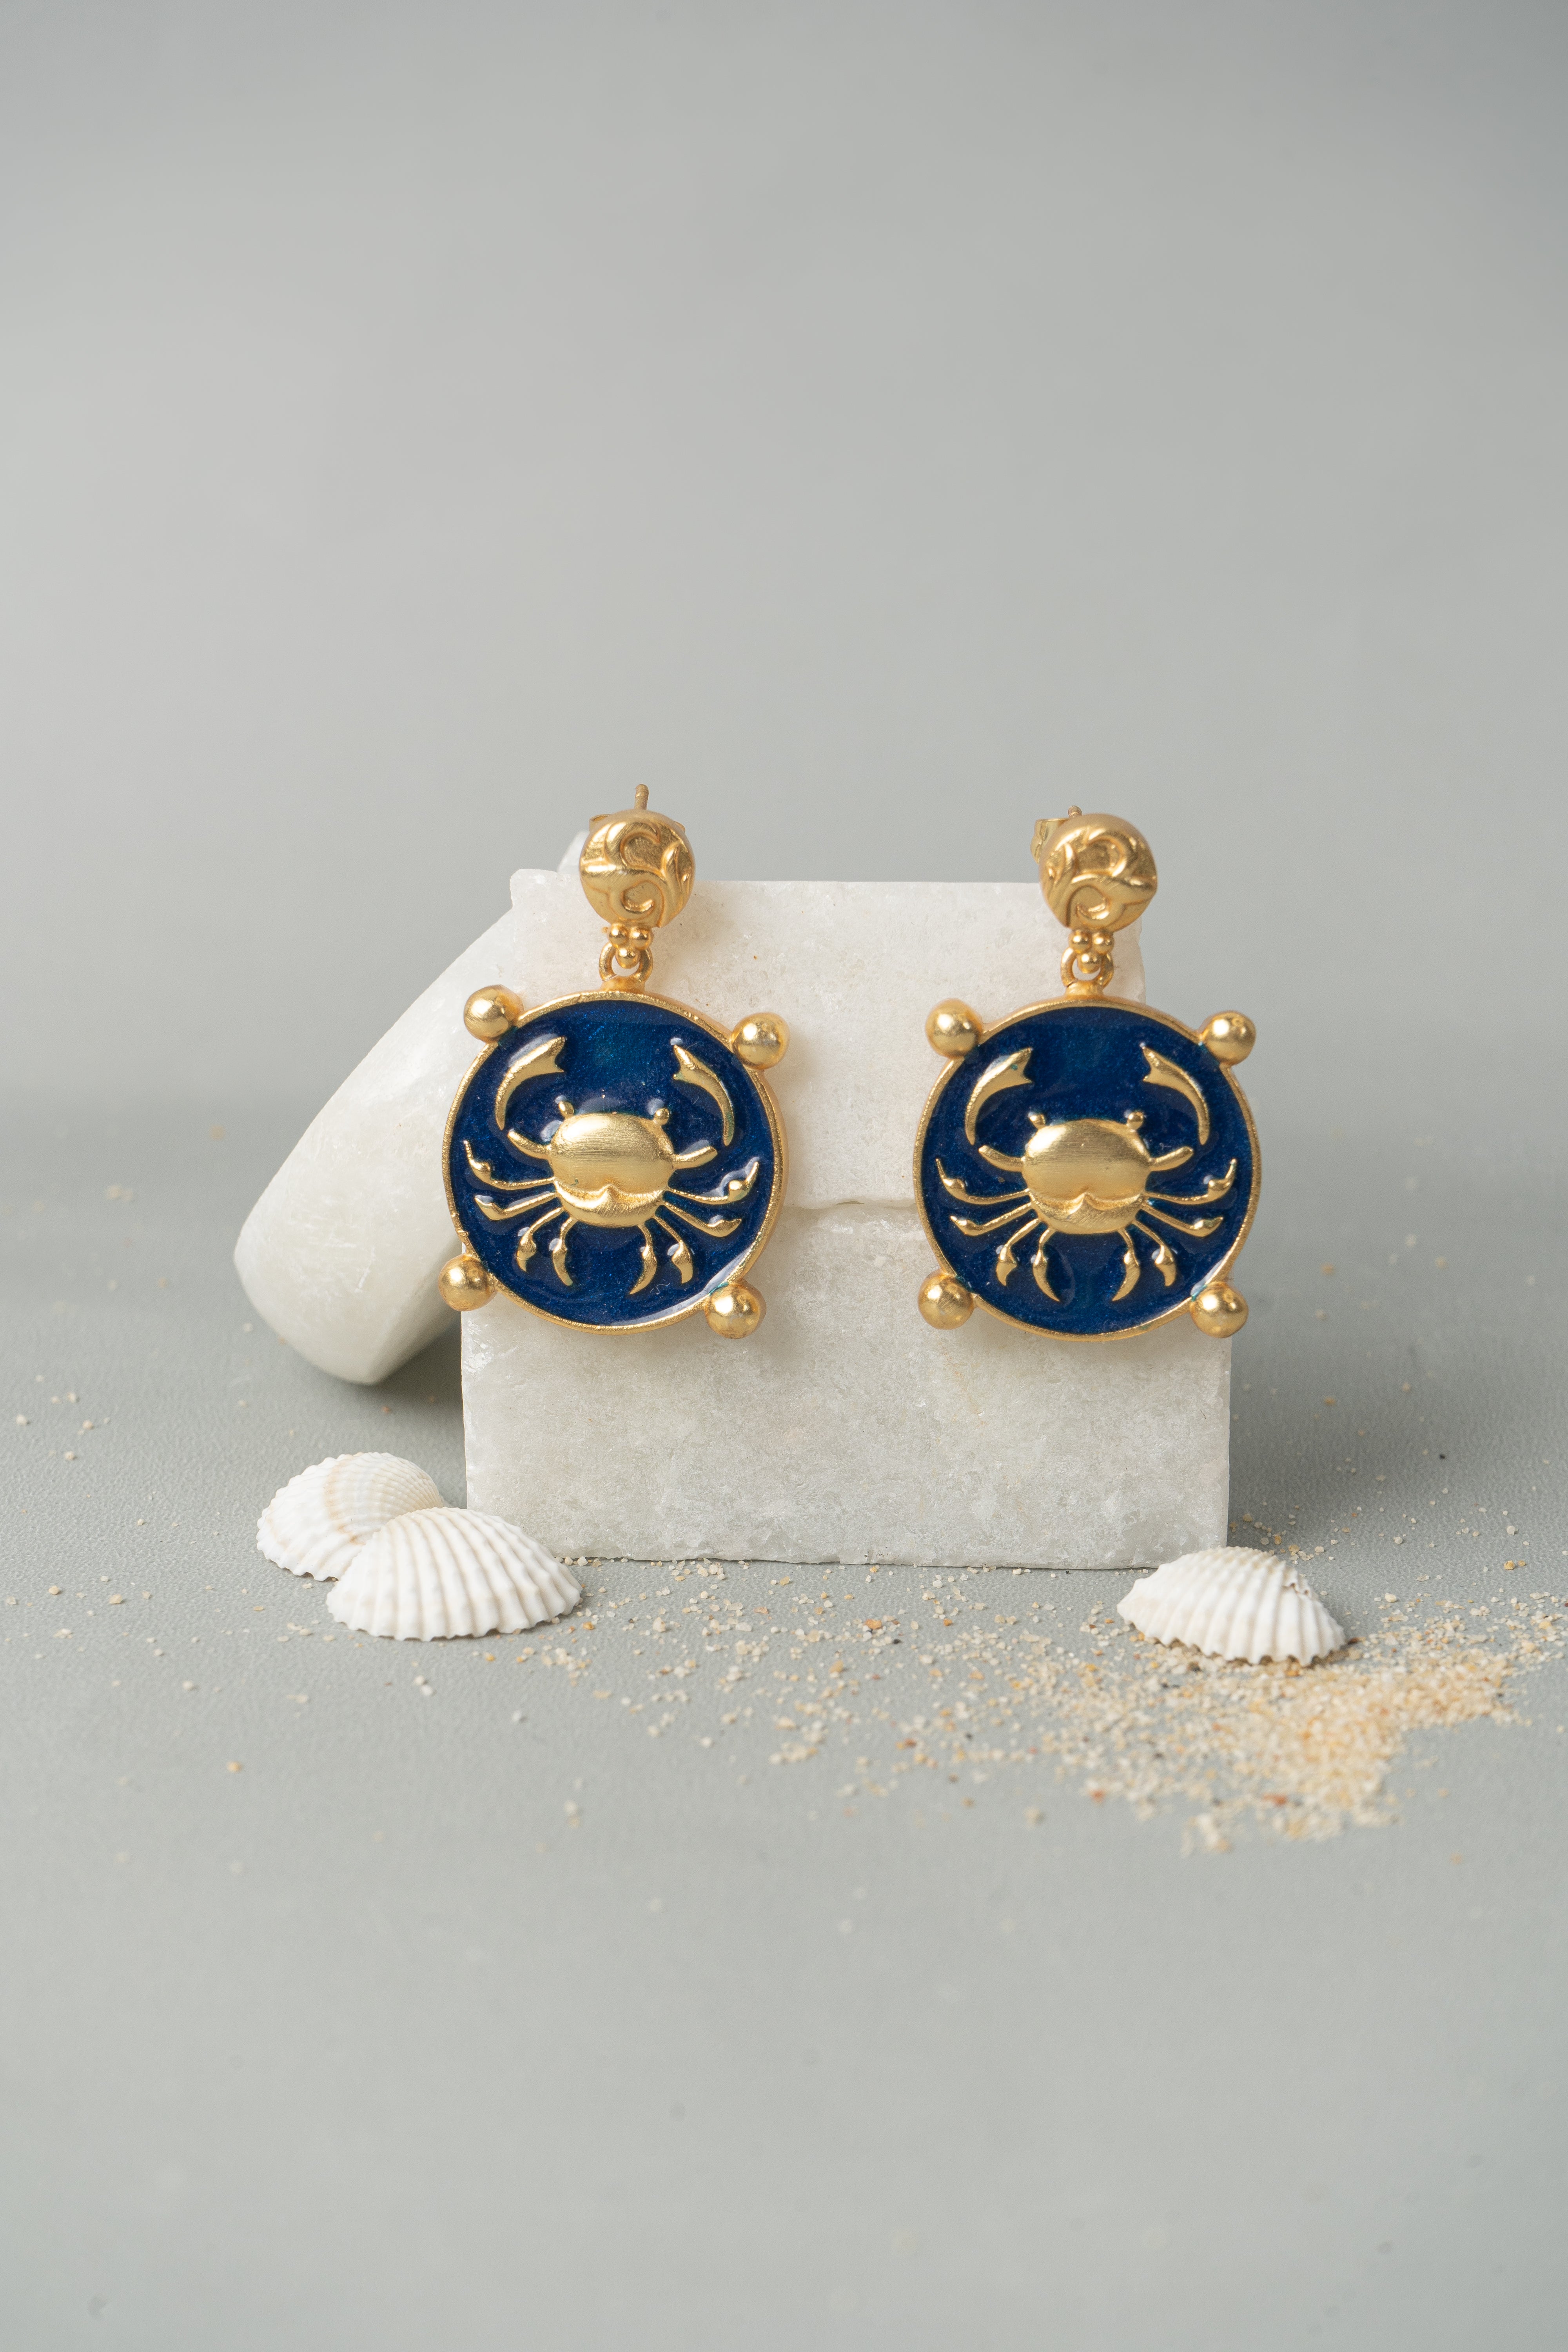 Amama,Crazy Cancer Earrings